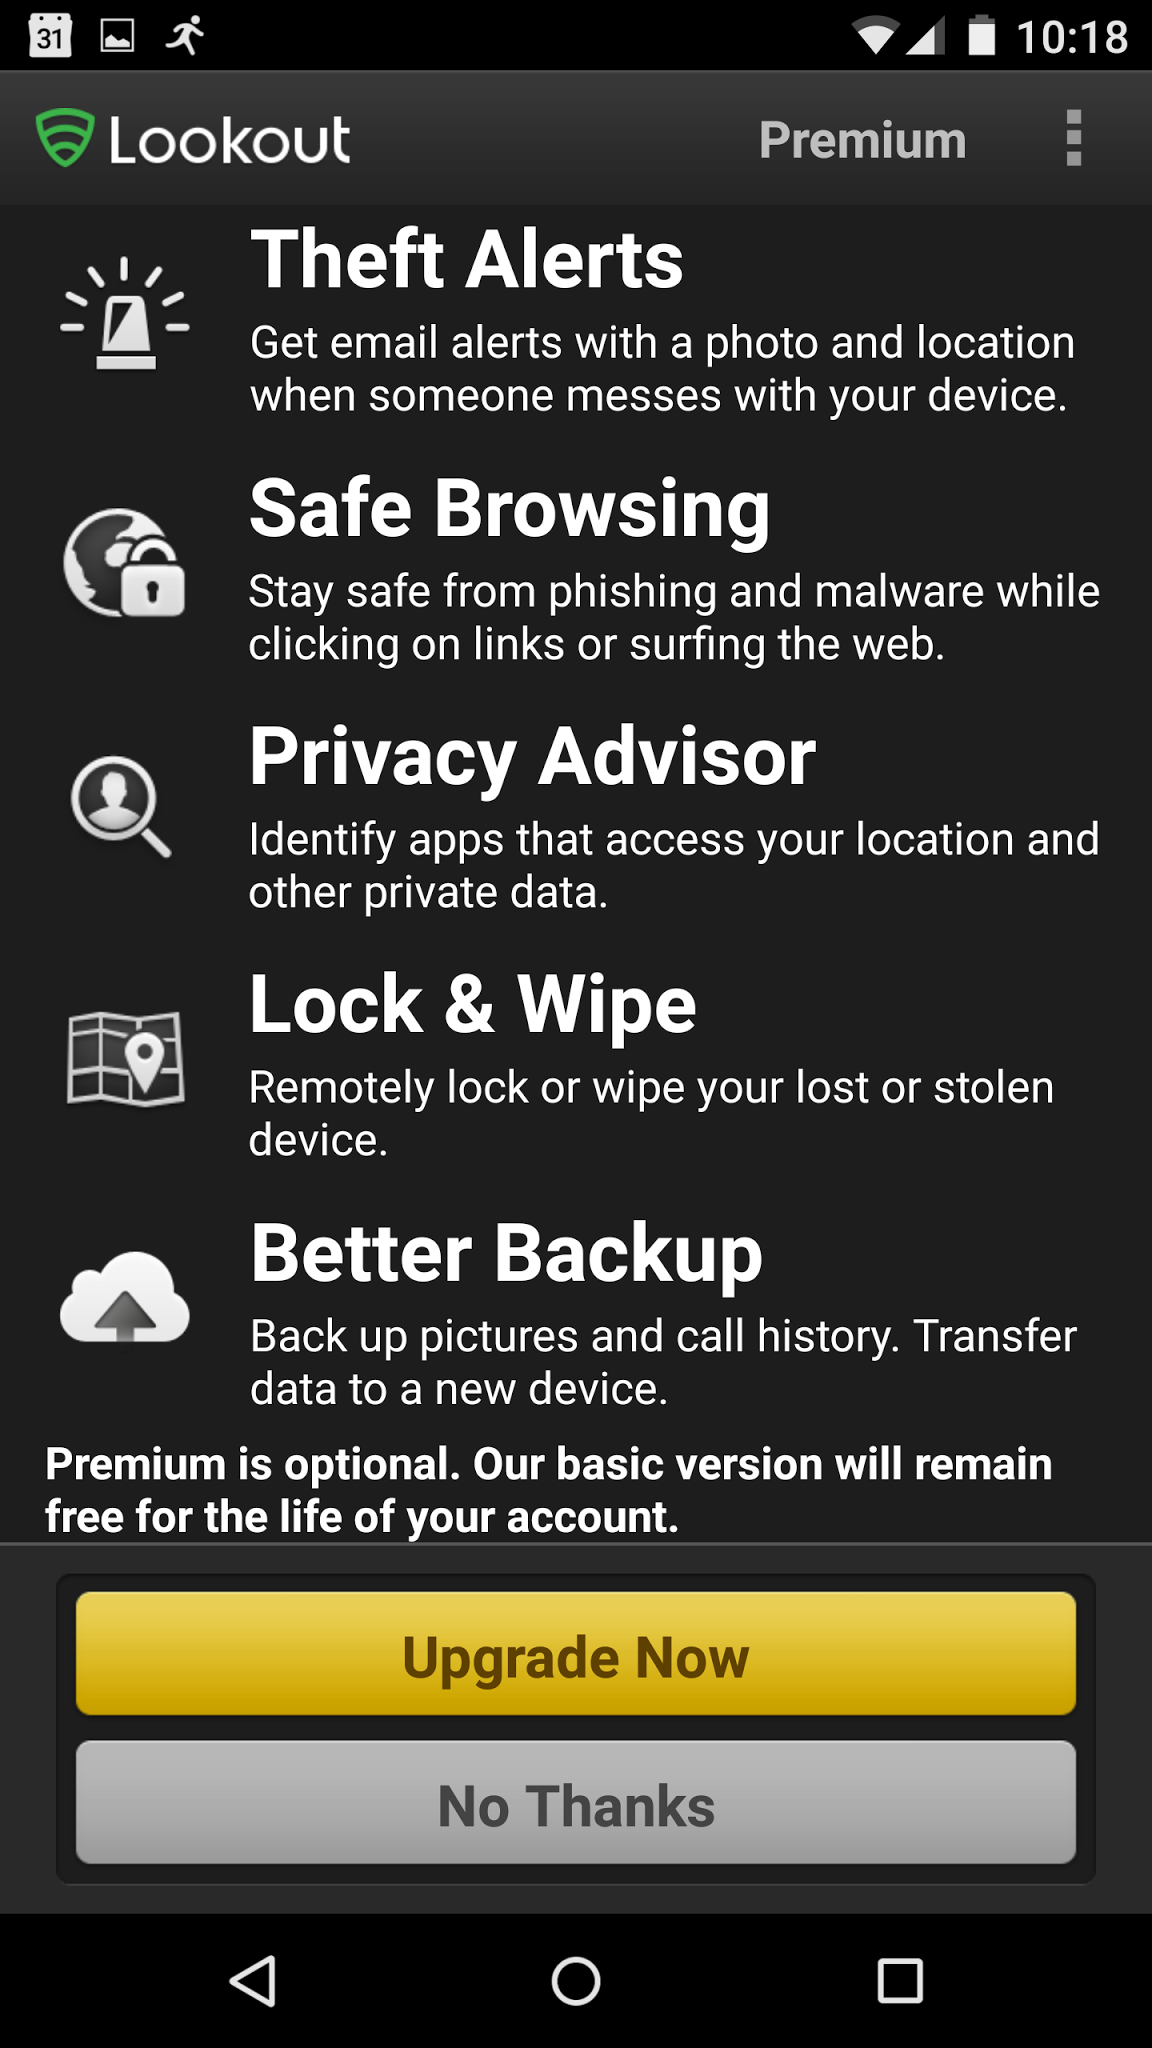 Lookout - Free Version SECURITY & ANTIVIRUS App Scanning: Continuous, over-the-air protection from viruses, malware, adware and spyware FIND MY PHONE Locate & Scream: Map the location of your device